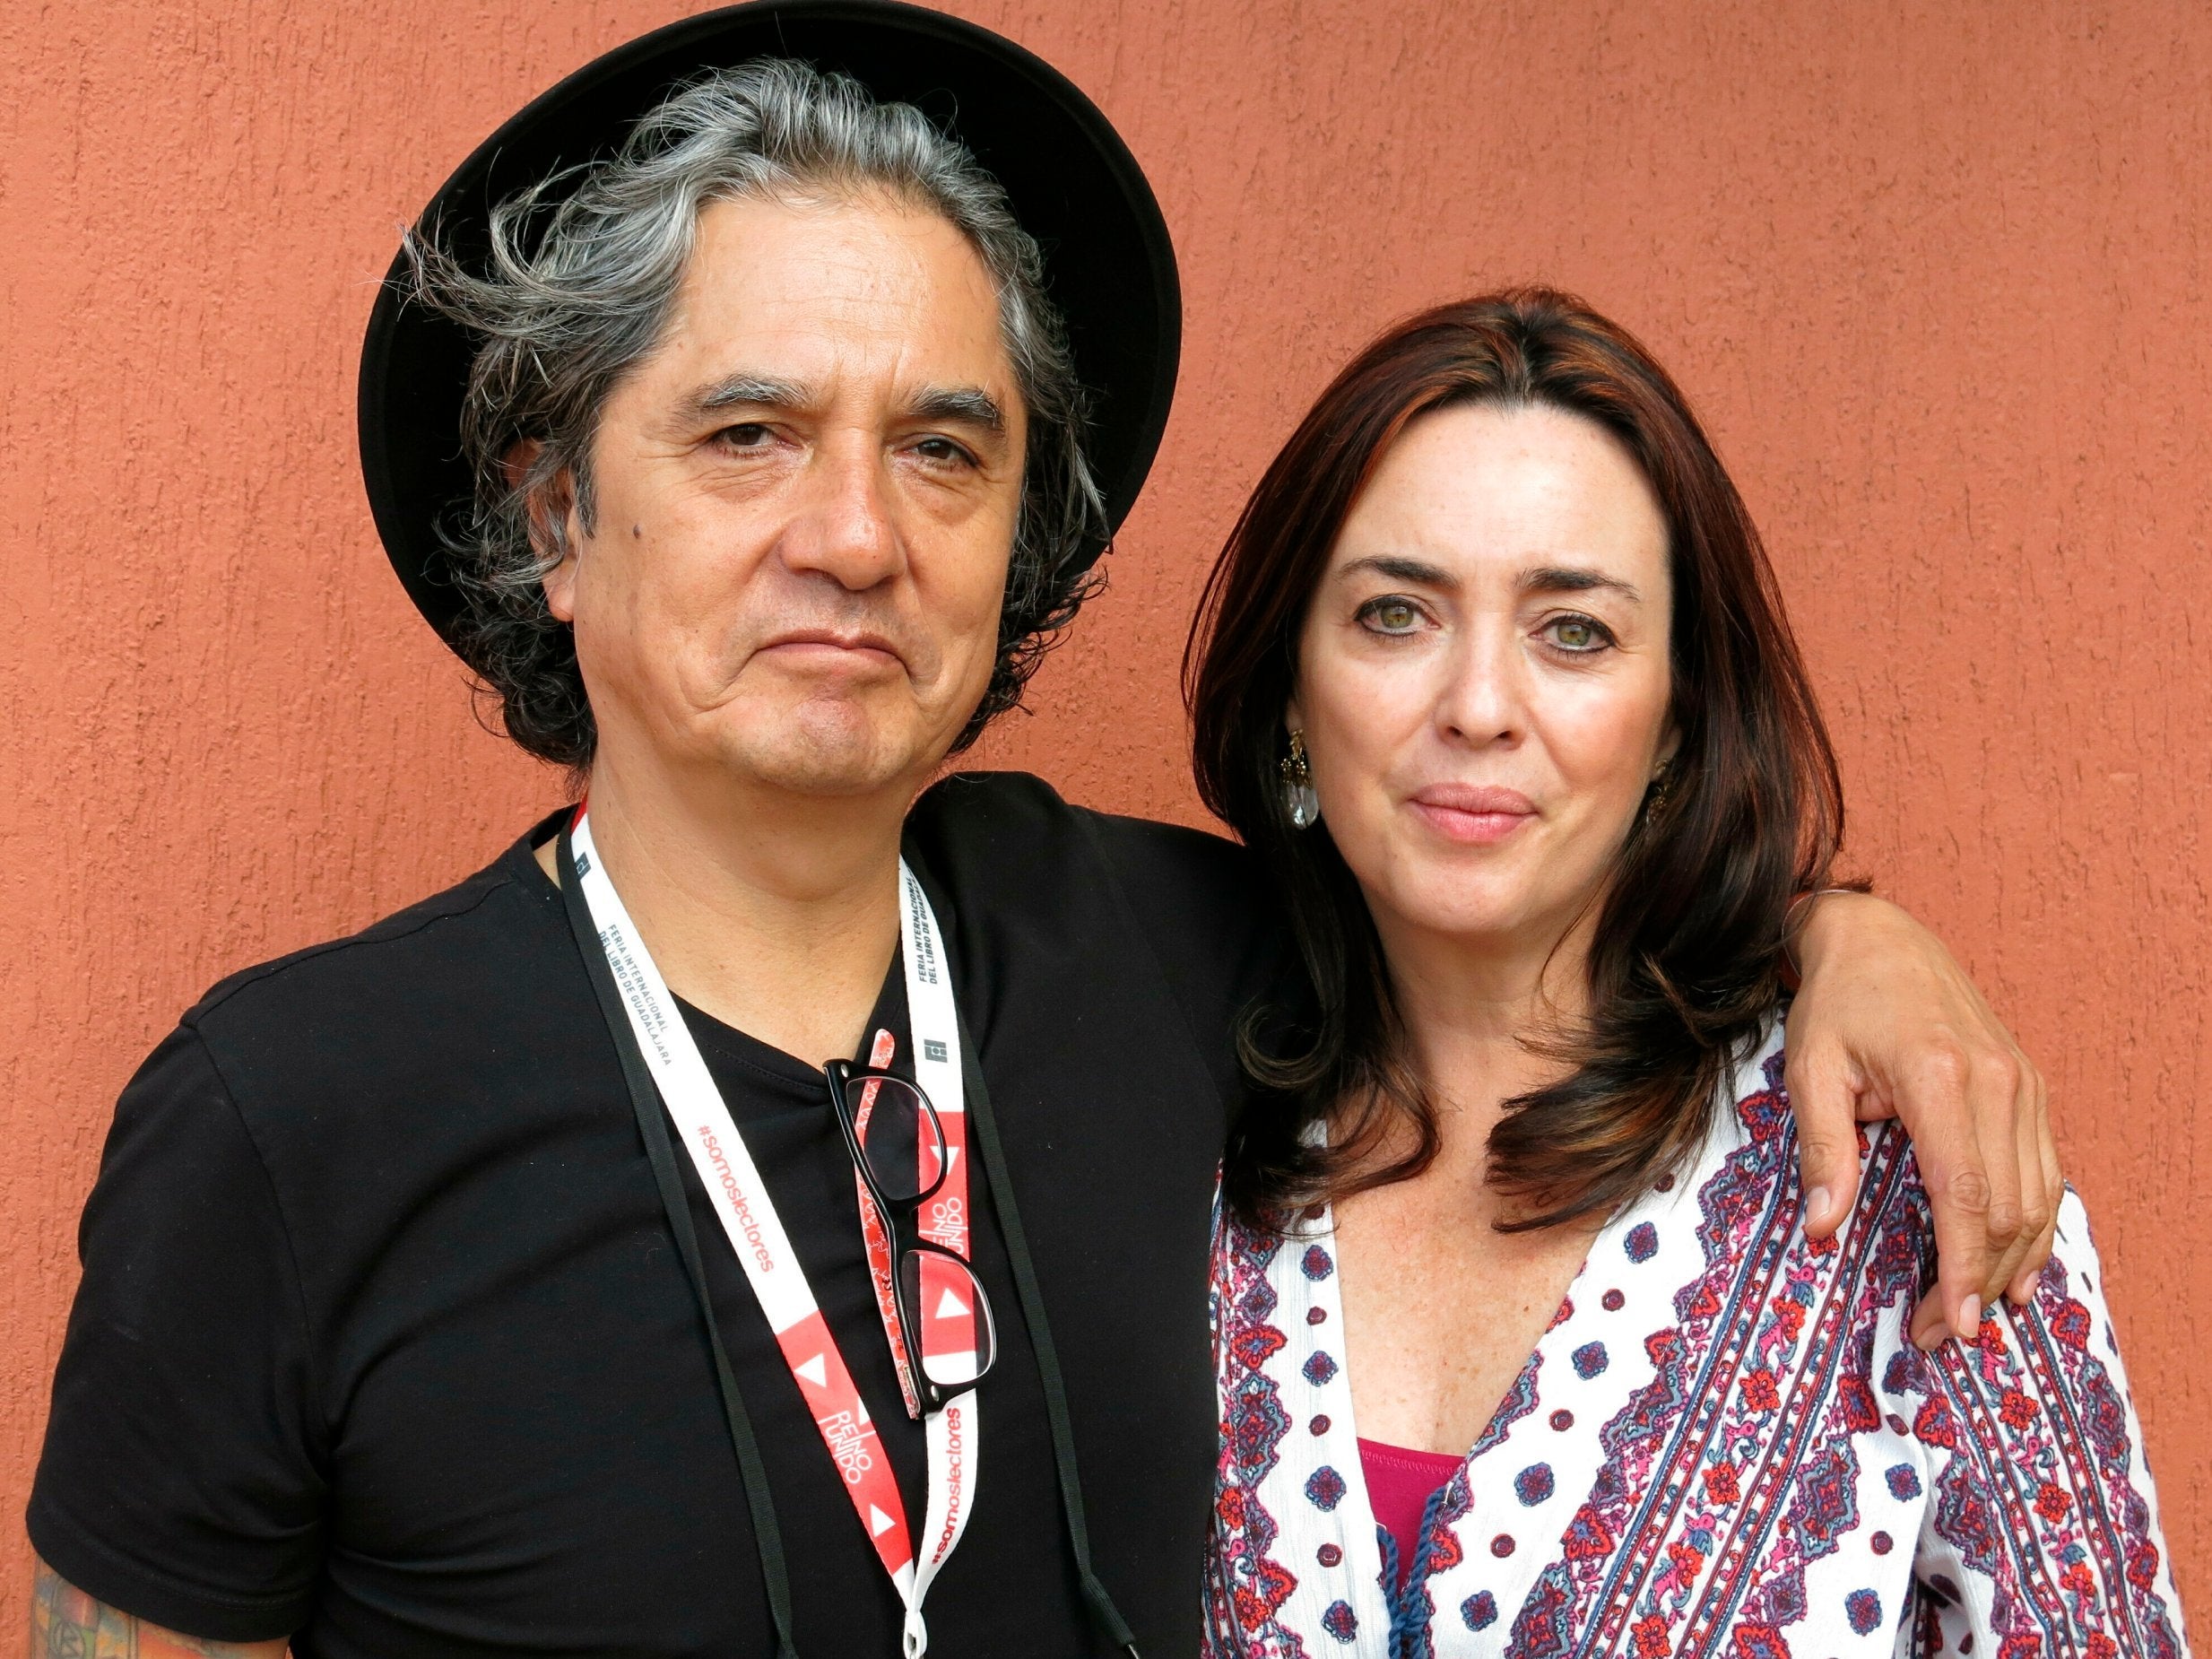 Mexican musician Armando Vega Gil, left, killed himself on 1 April 2019 after being anonymously accused of sexually abusing a woman when she was 13 years old.